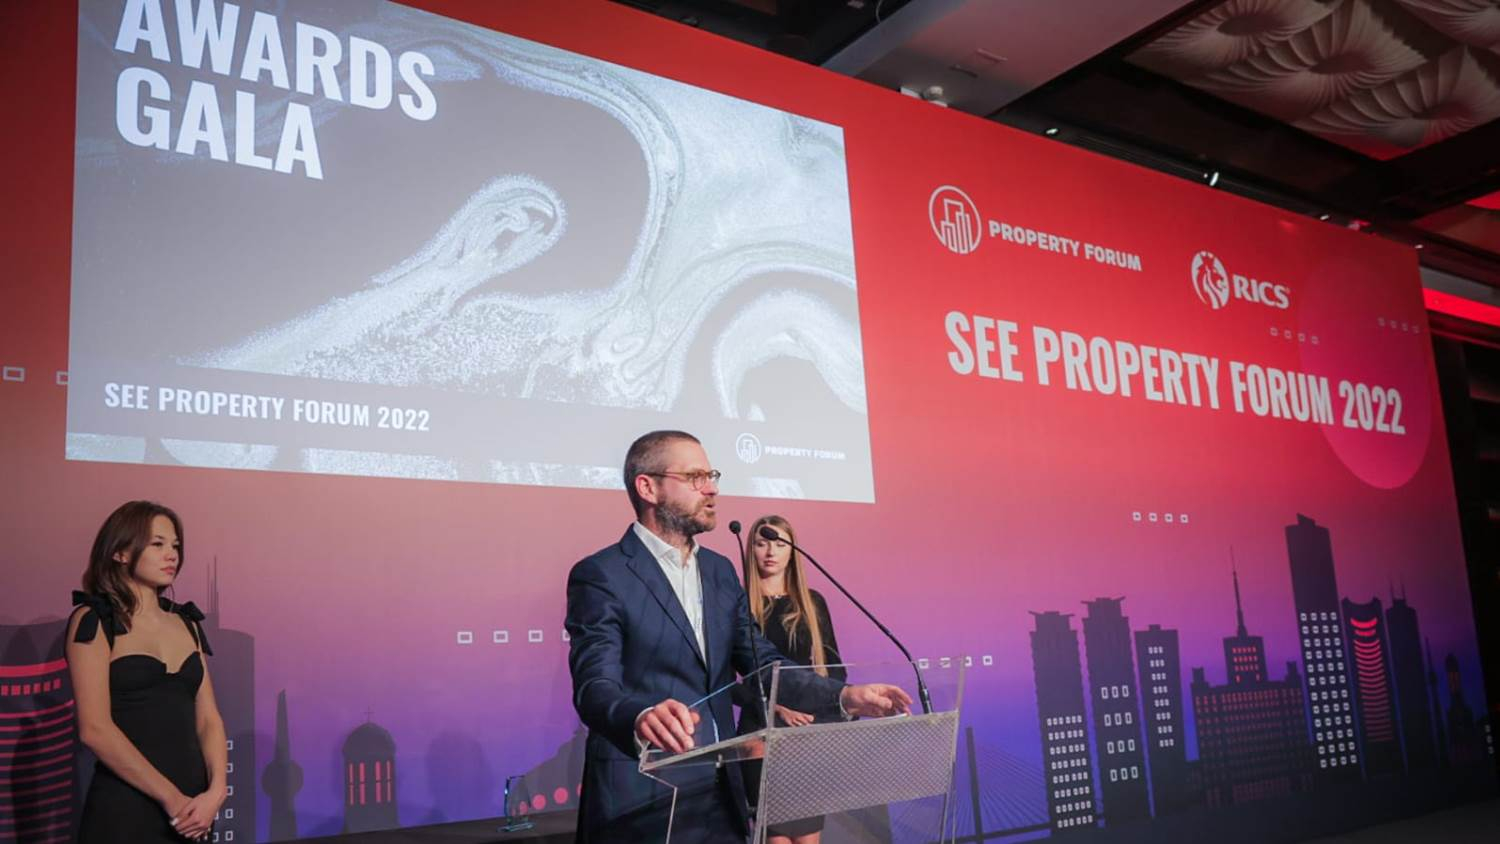 News Article award event Property Forum report Romania SEE Property Forum